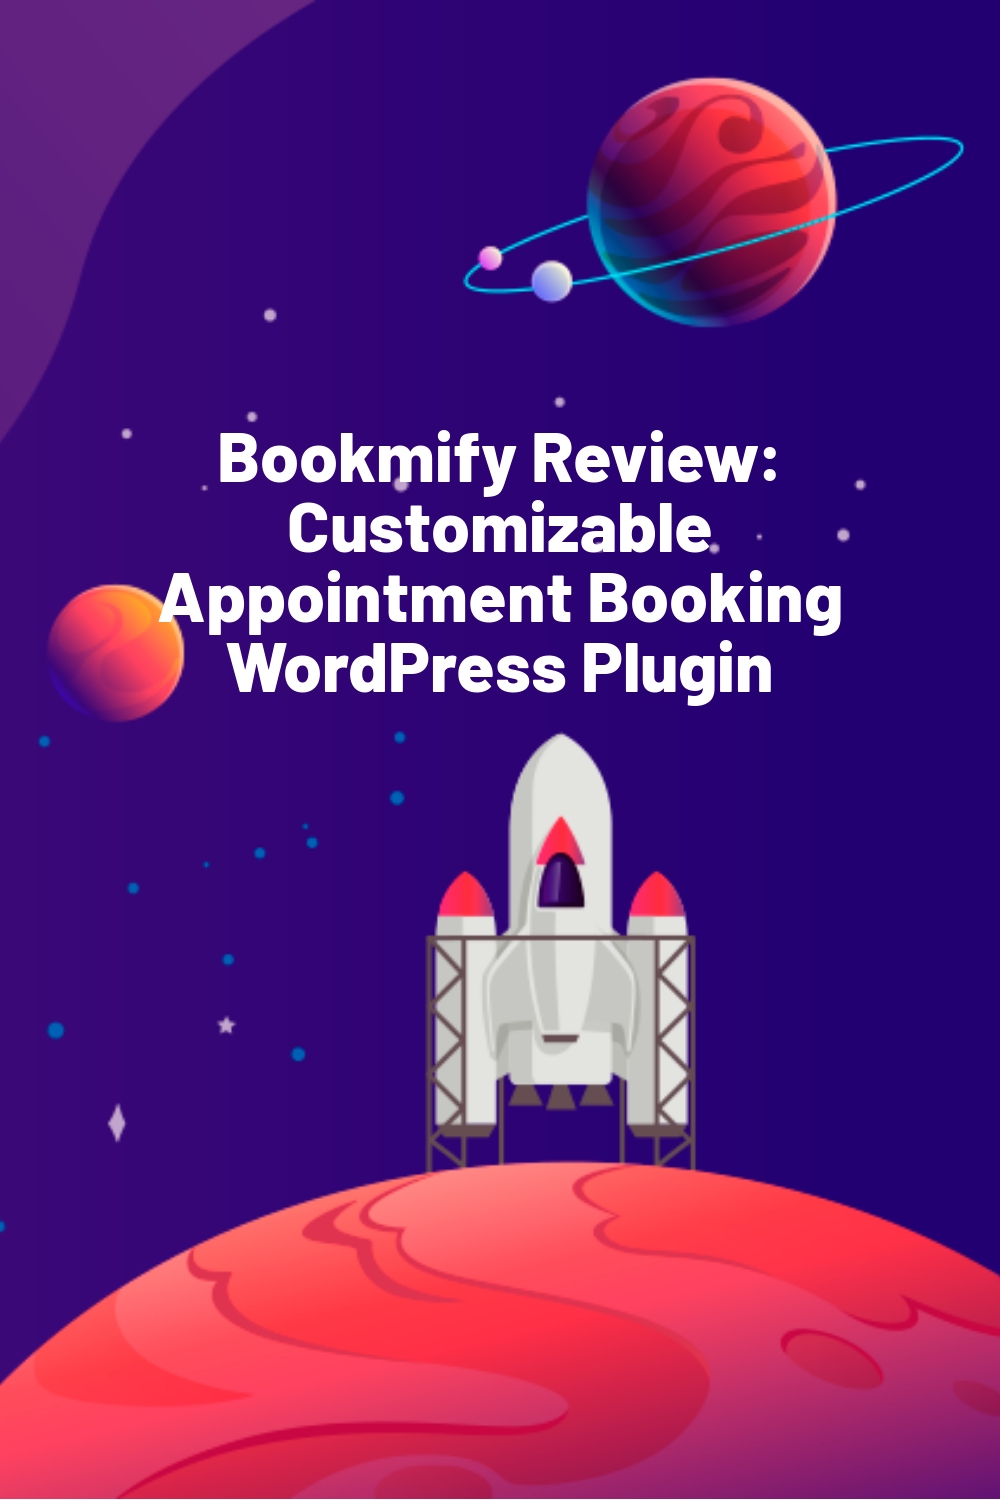 Bookmify Review: Customizable Appointment Booking WordPress Plugin